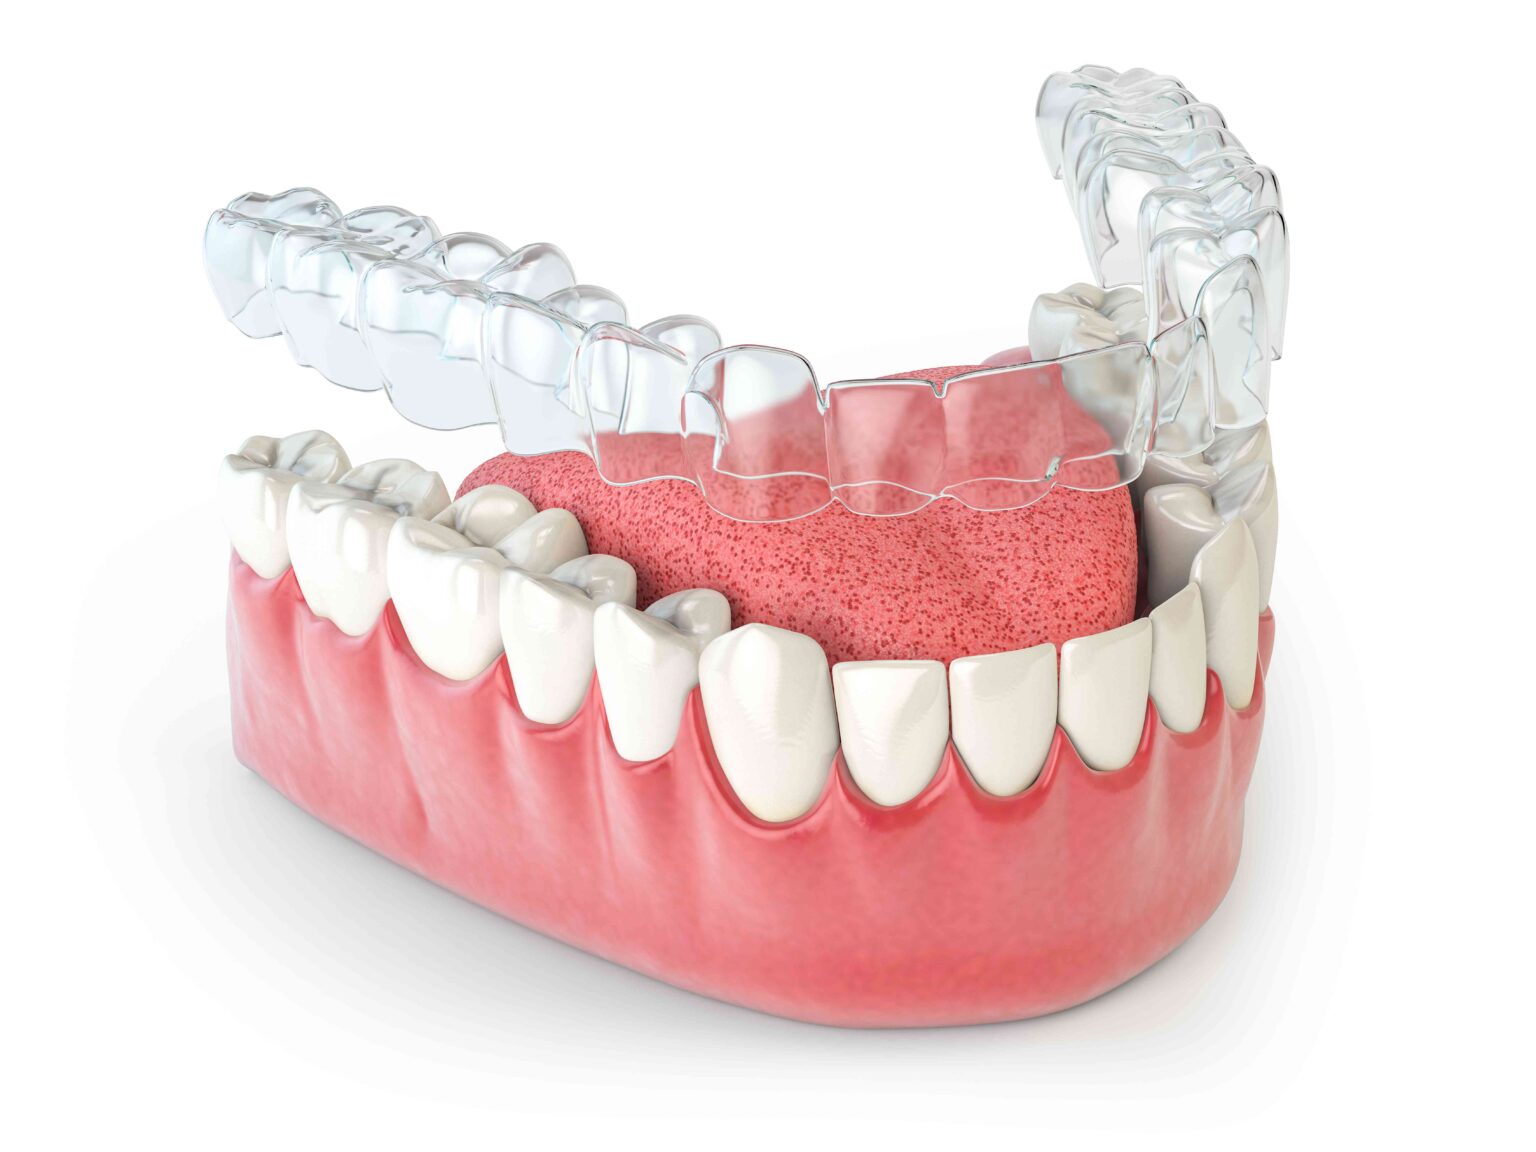 Invisalign invisible retainer or braces with lawer jaw islated on white.